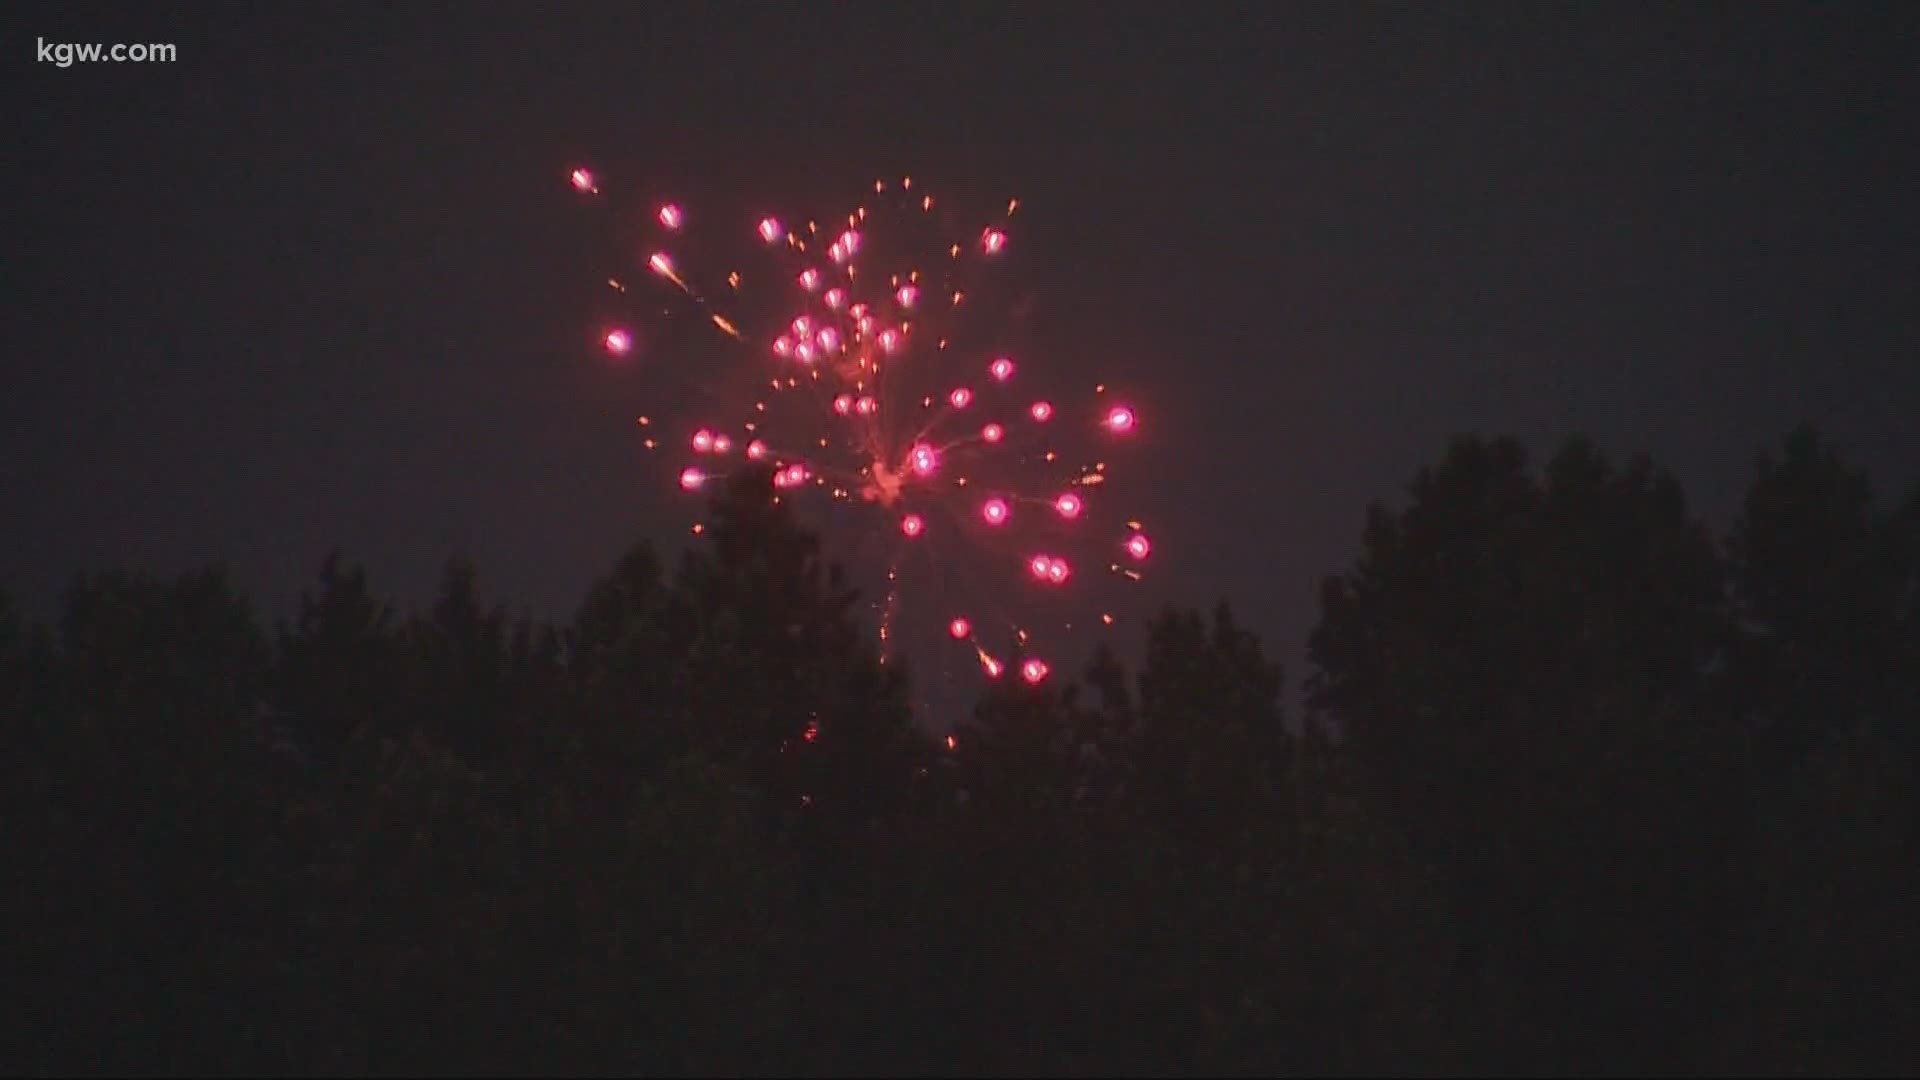 Amid rising COVID-19 cases, officials in Oregon and Clark County in Washington are asking people to celebrate the holiday at home.